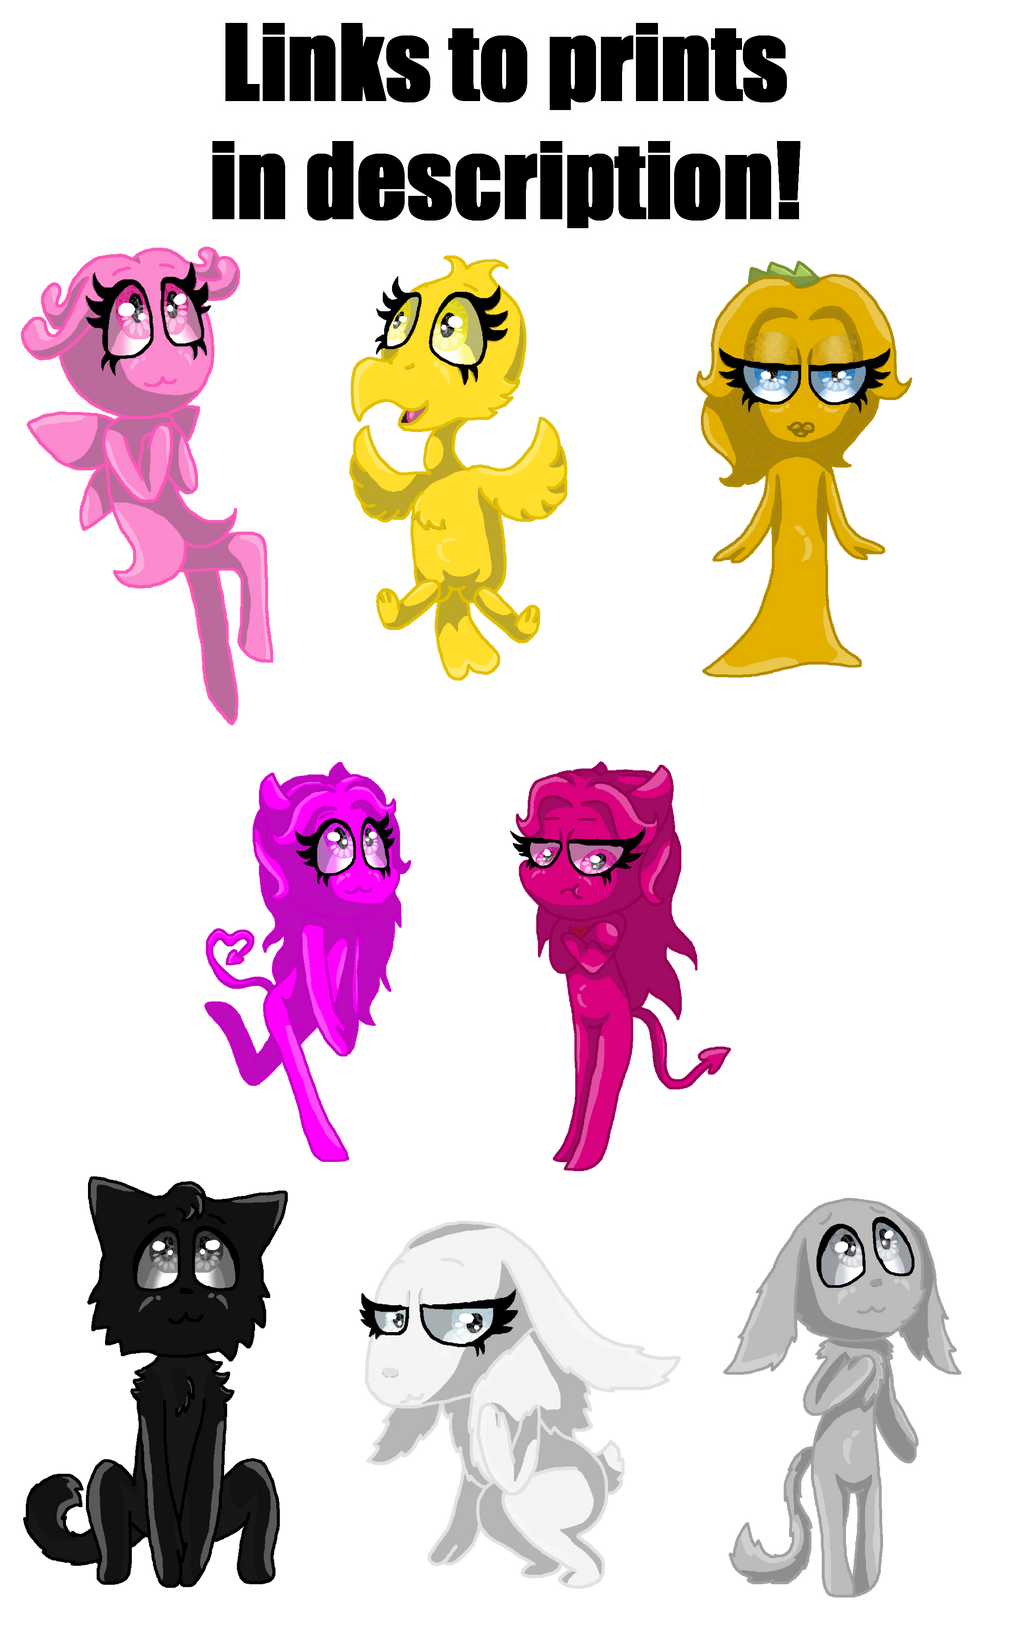 Rainbow Friends PNG Transparent Images Free Download